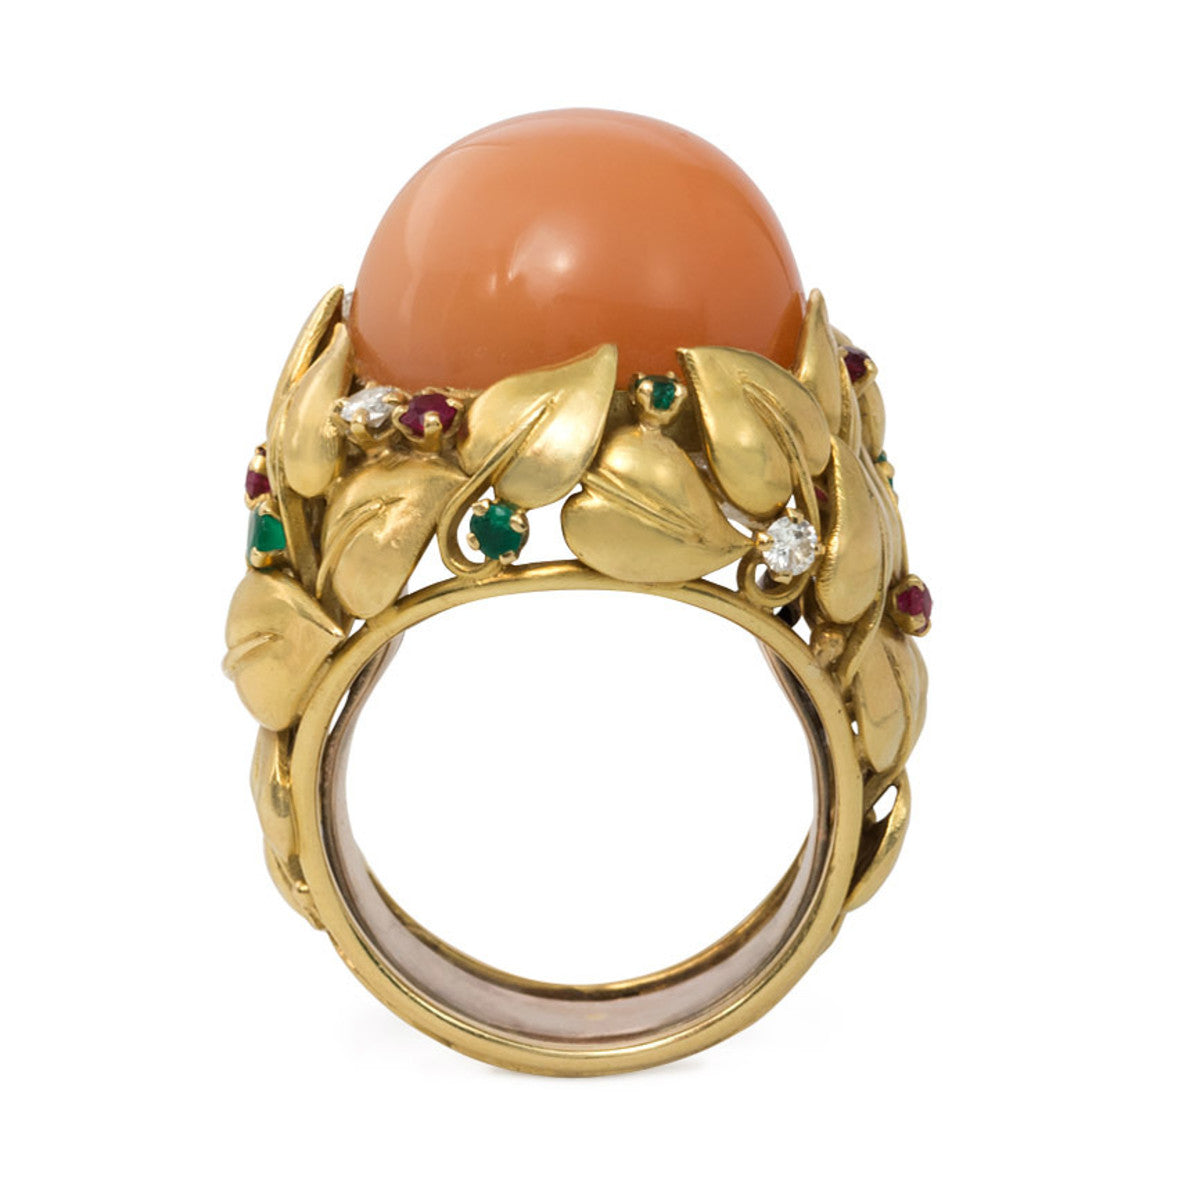 1950s 18KT Yellow Gold Moonstone, Diamond, Emerald & Ruby Cocktail Ring profile